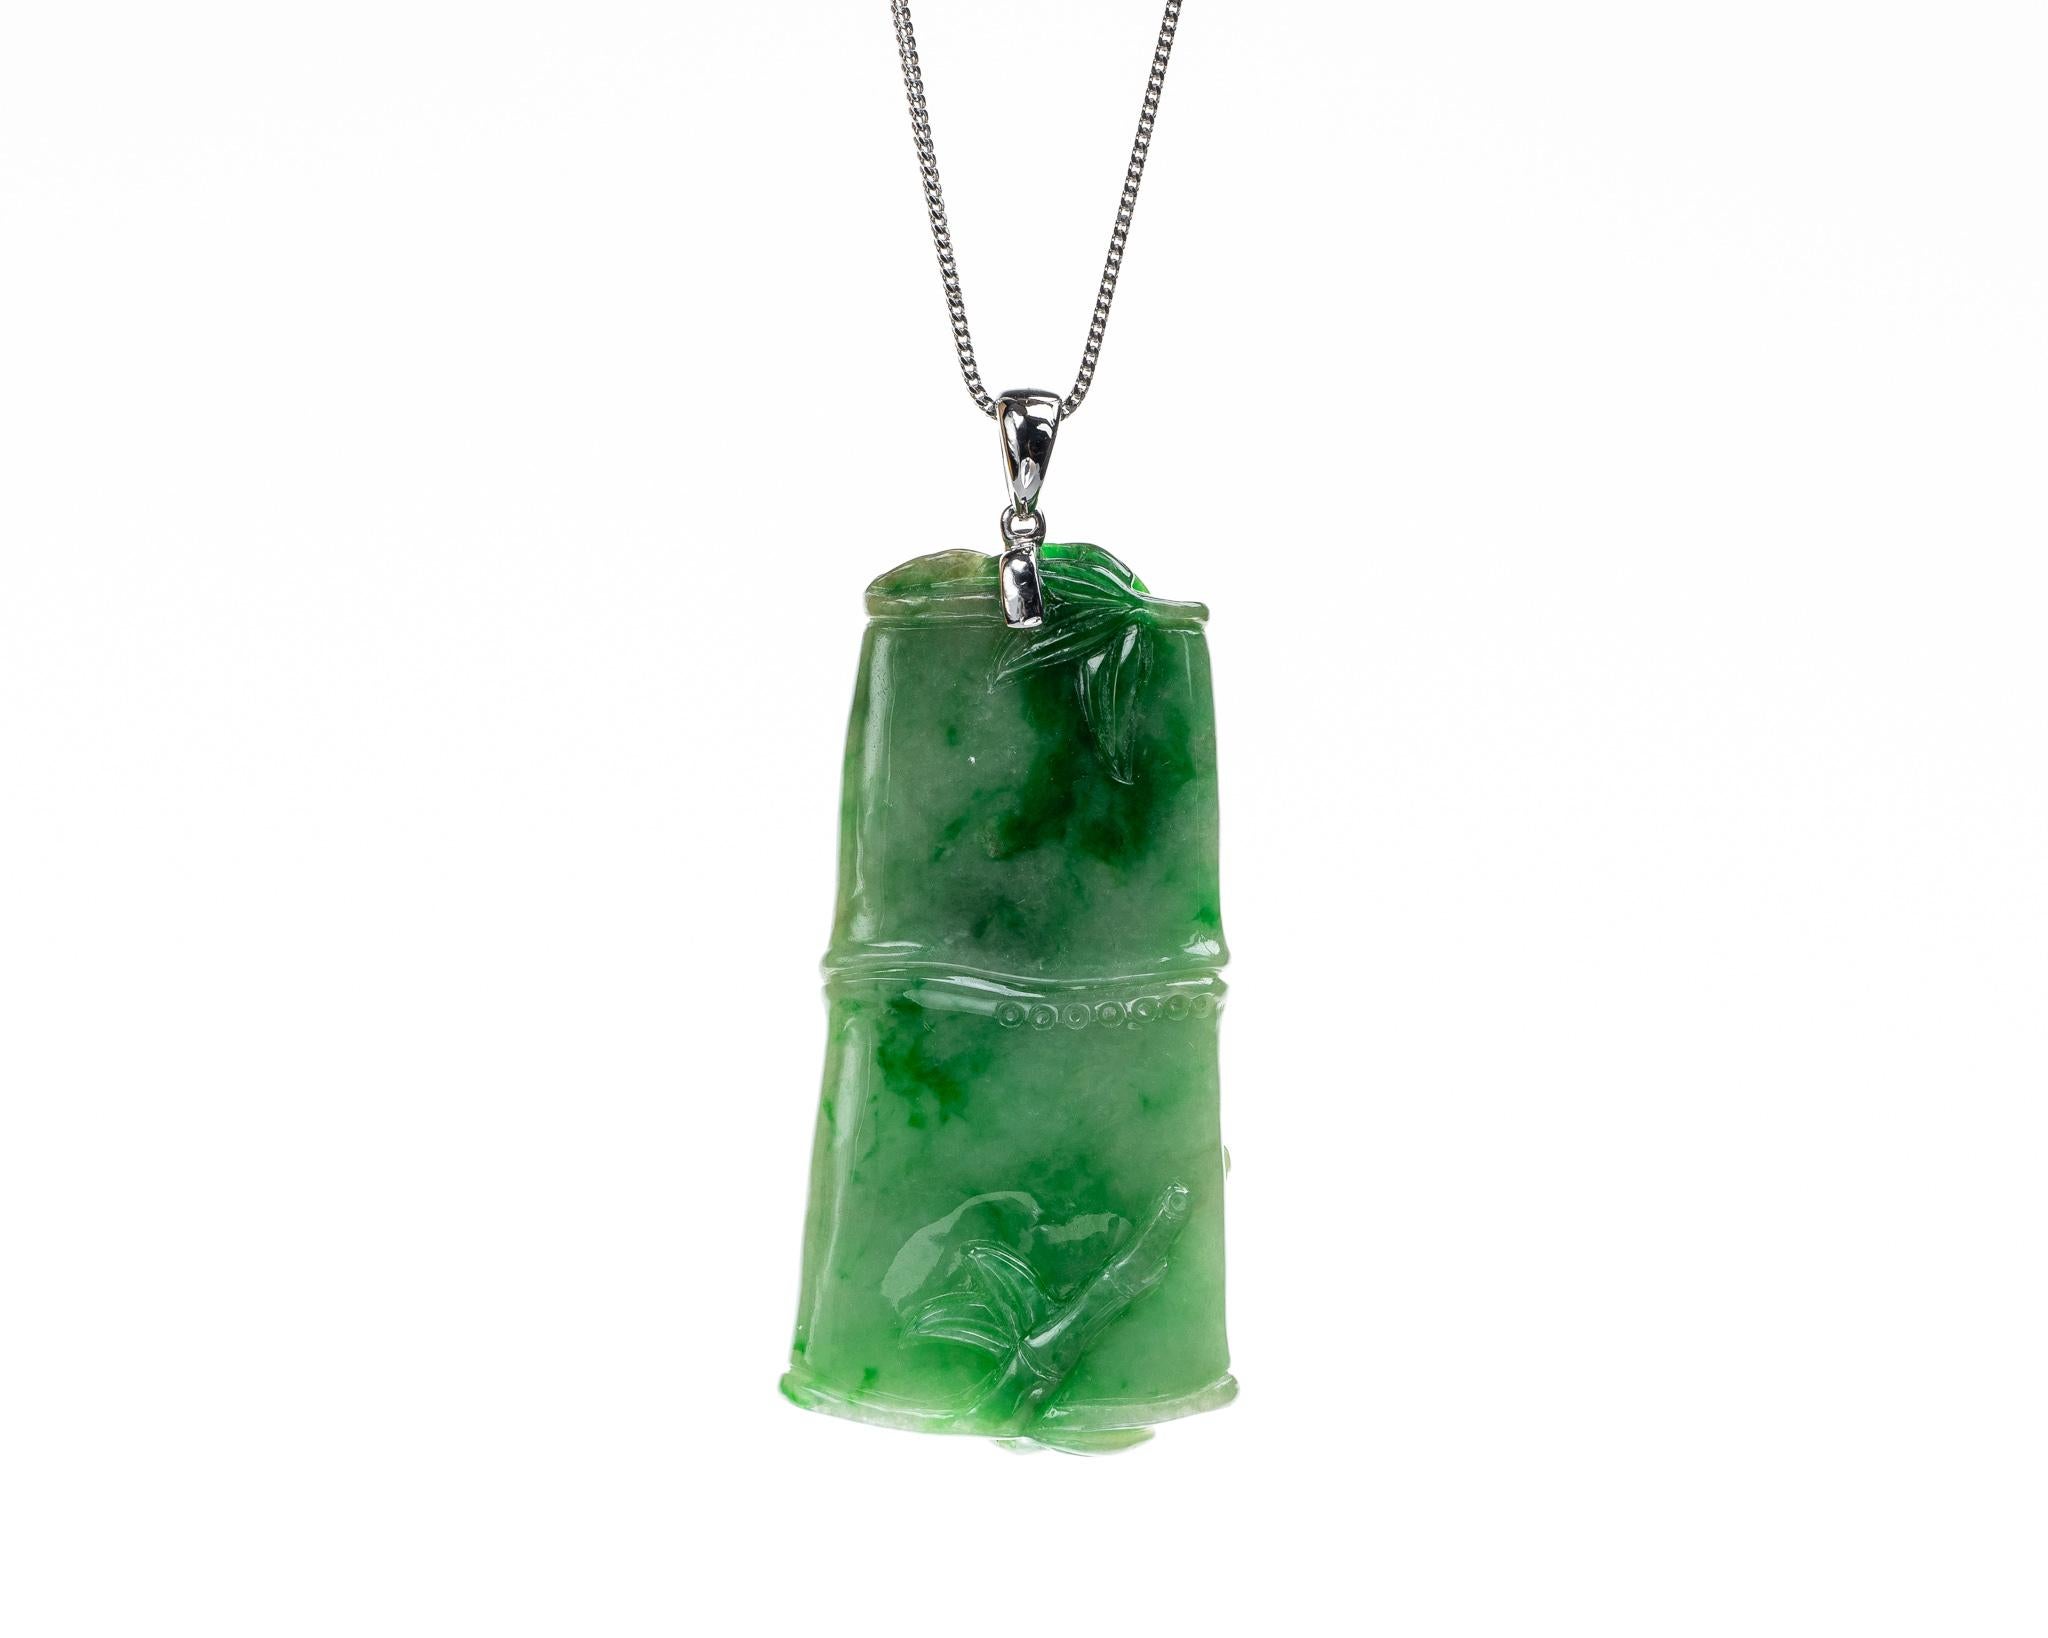 green necklace meaning